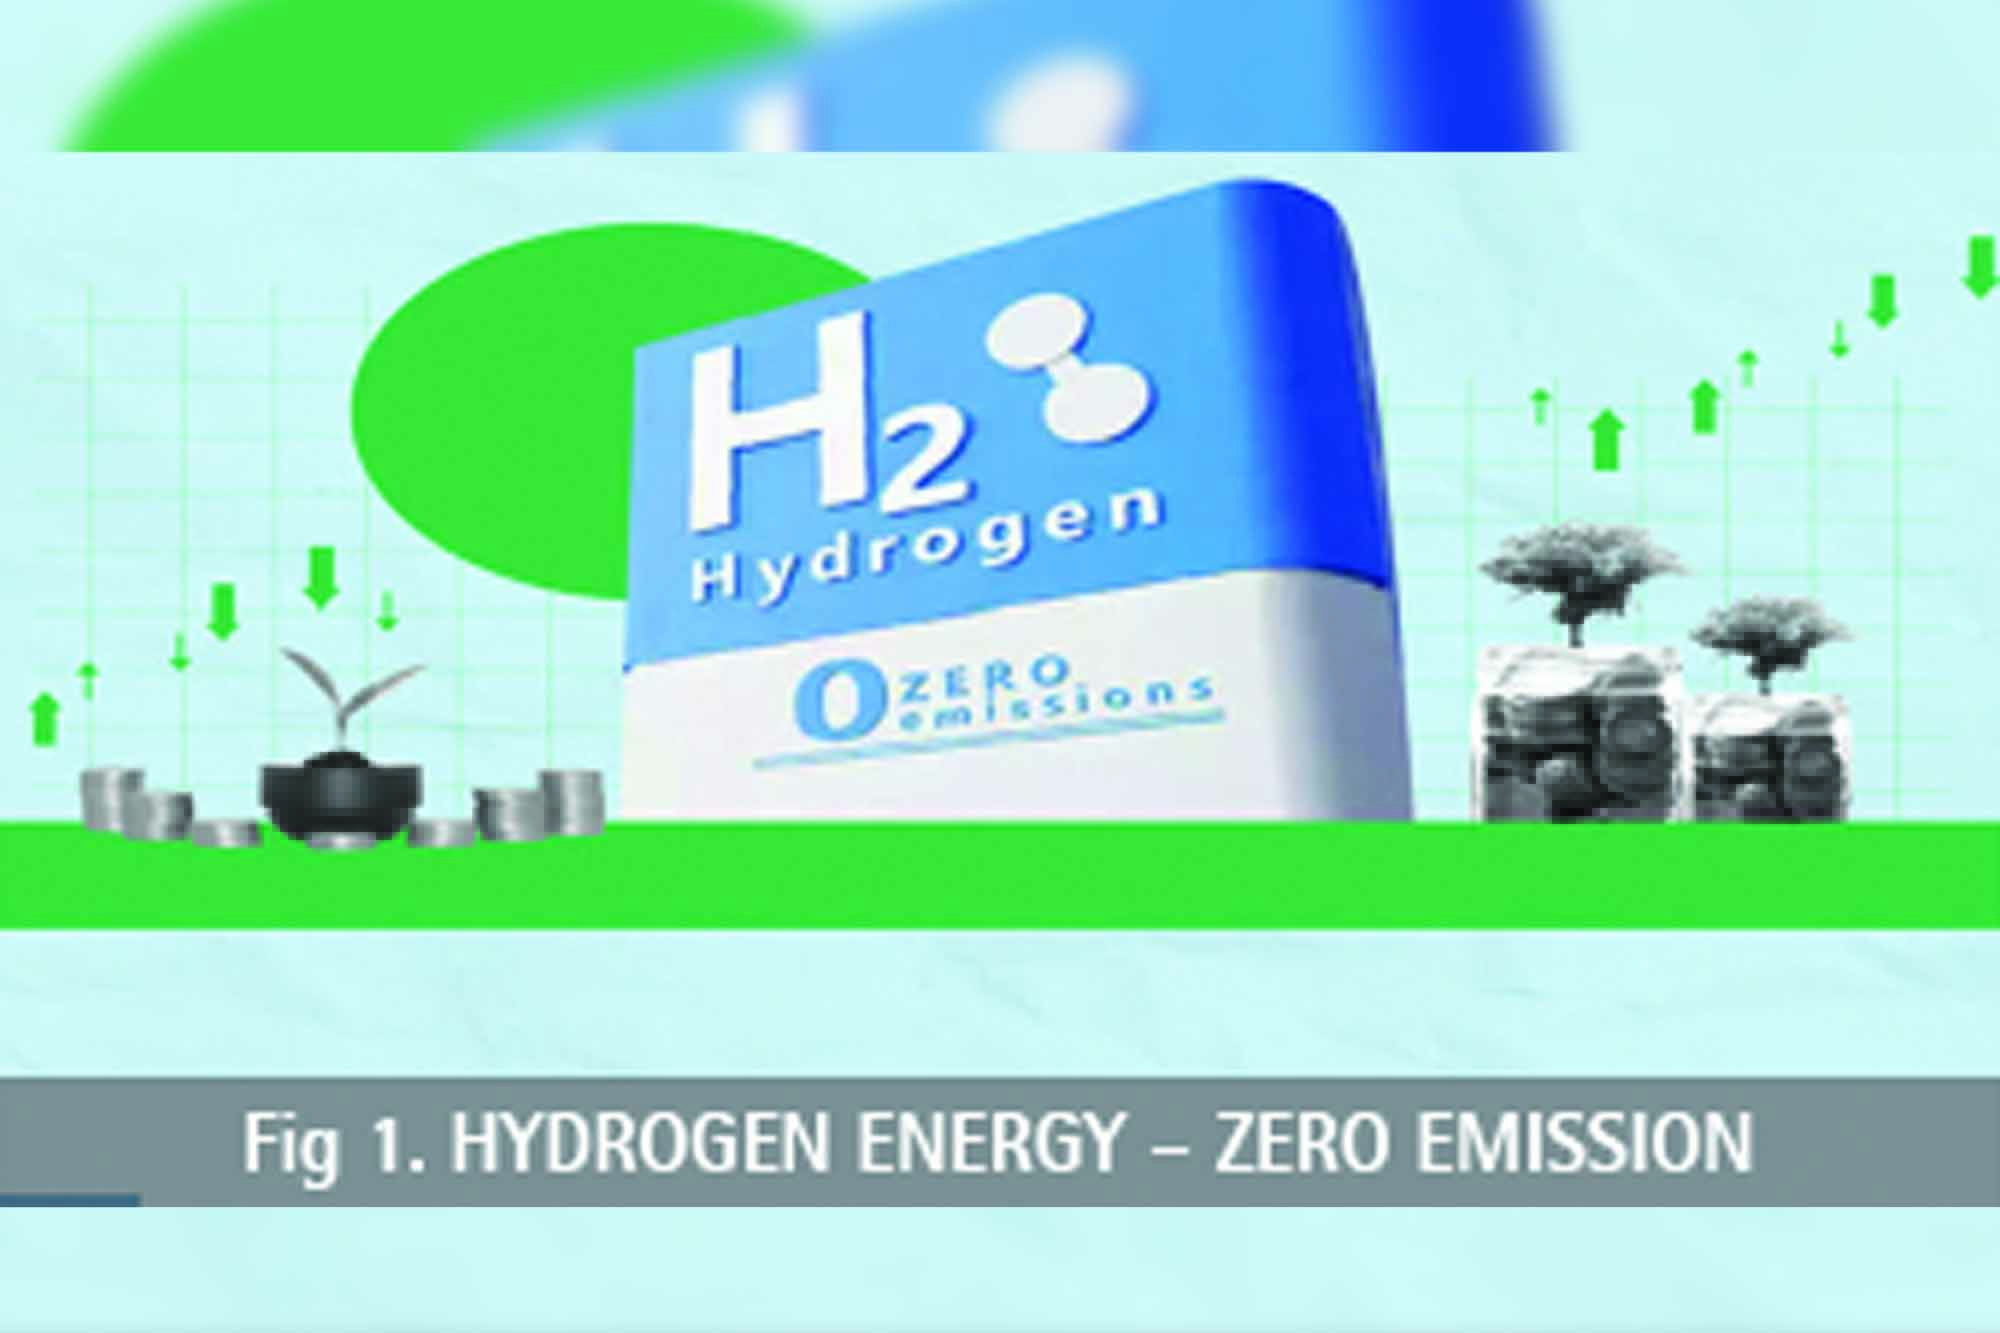 The future potential of hydrogen energy in India